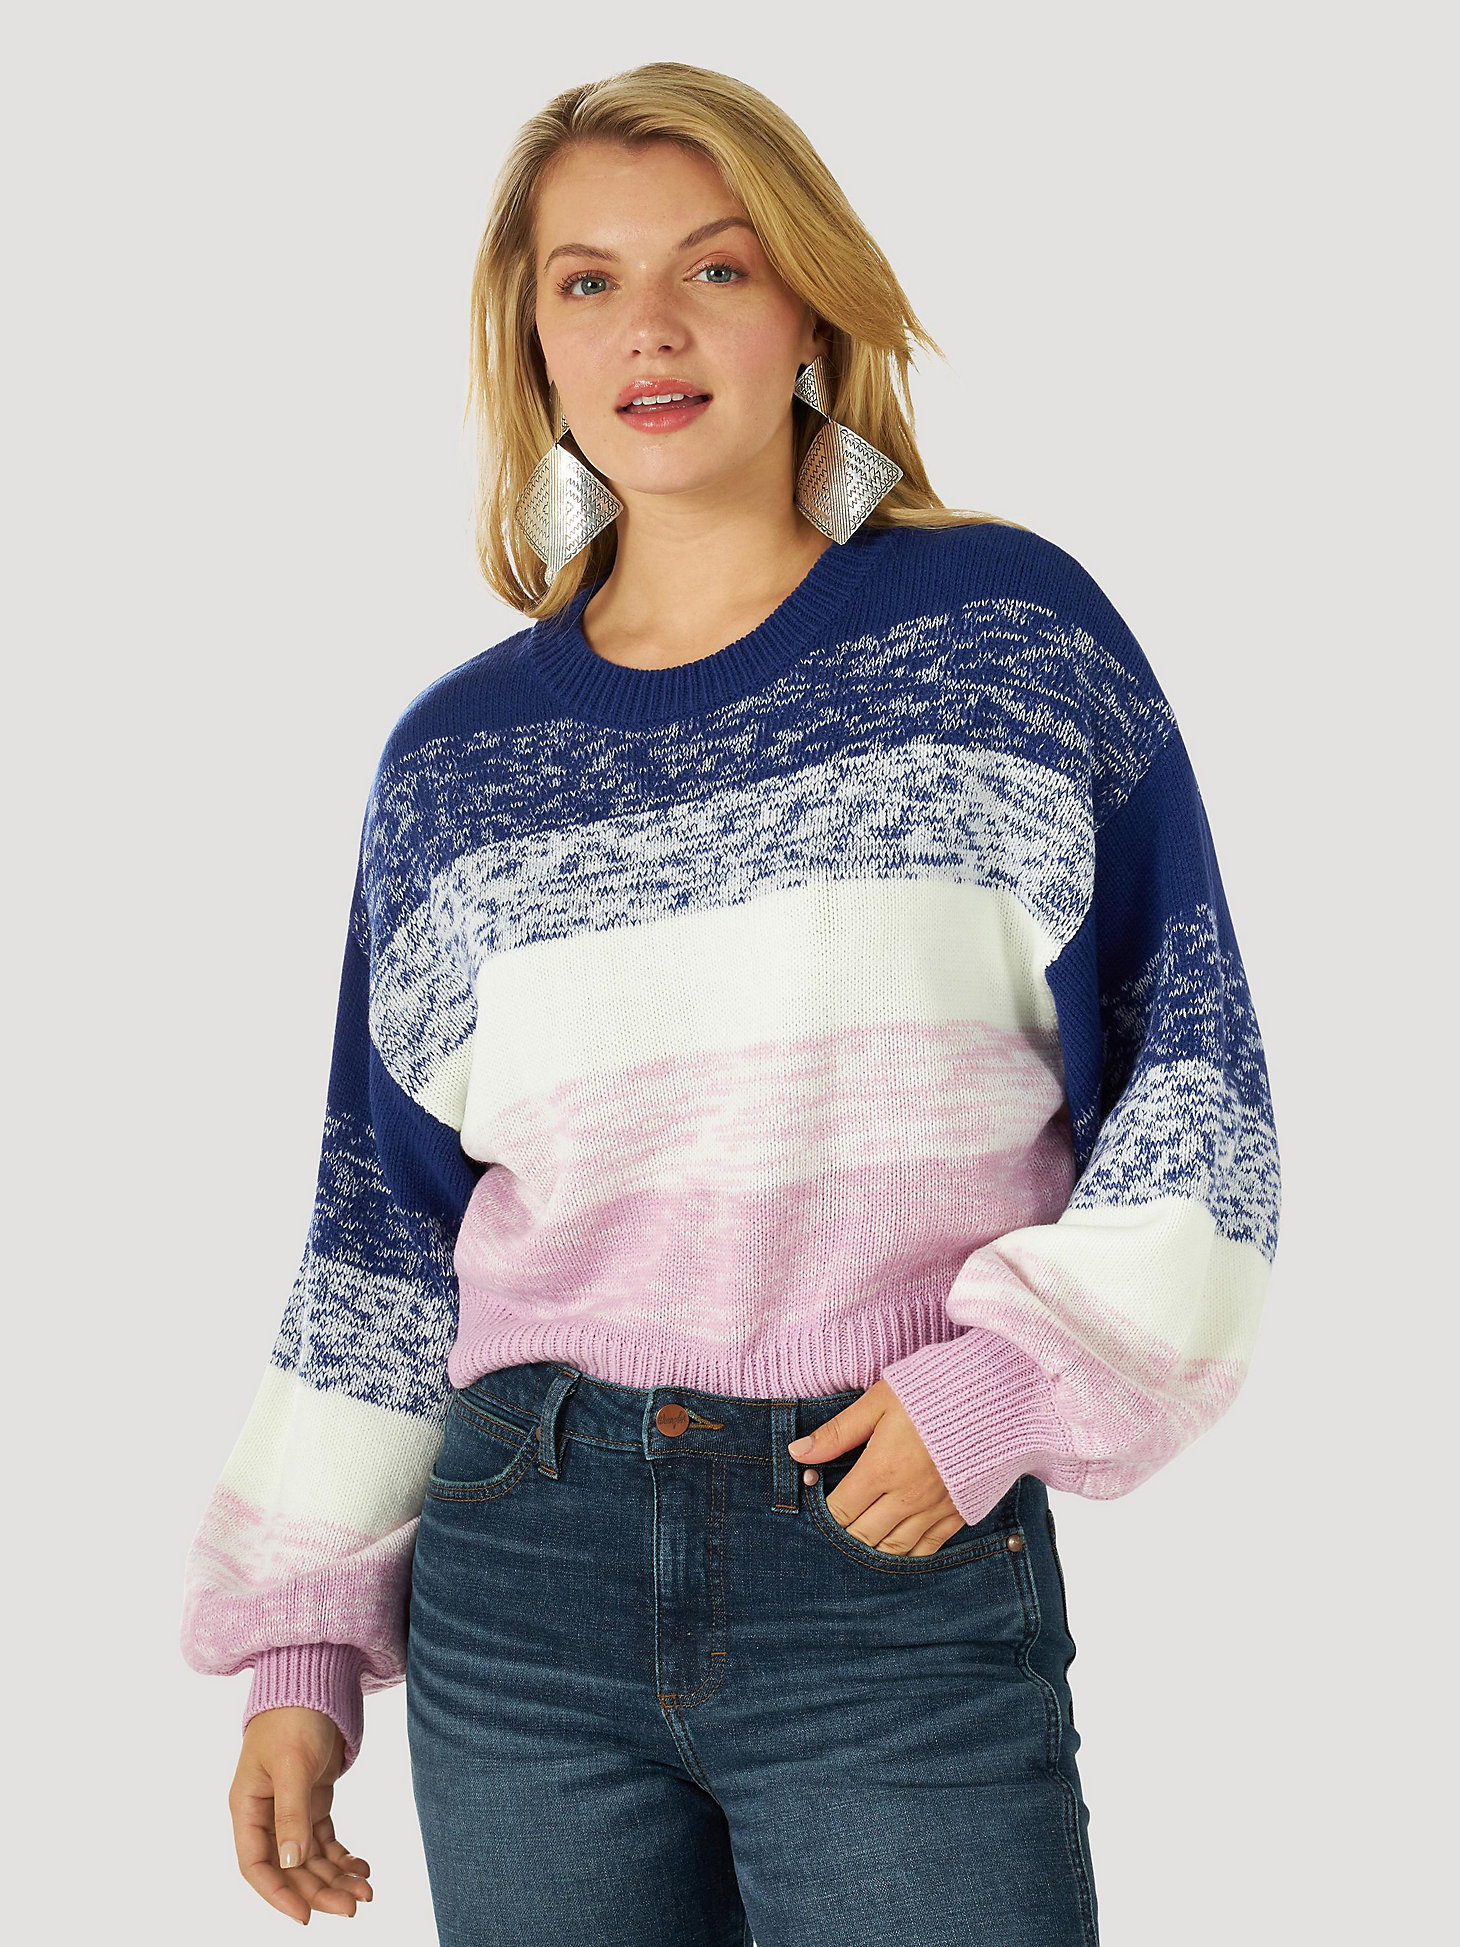 Women's Wrangler Retro® Balloon Sleeve Heathered Ombre Sweater in blue ombre alternative view 3